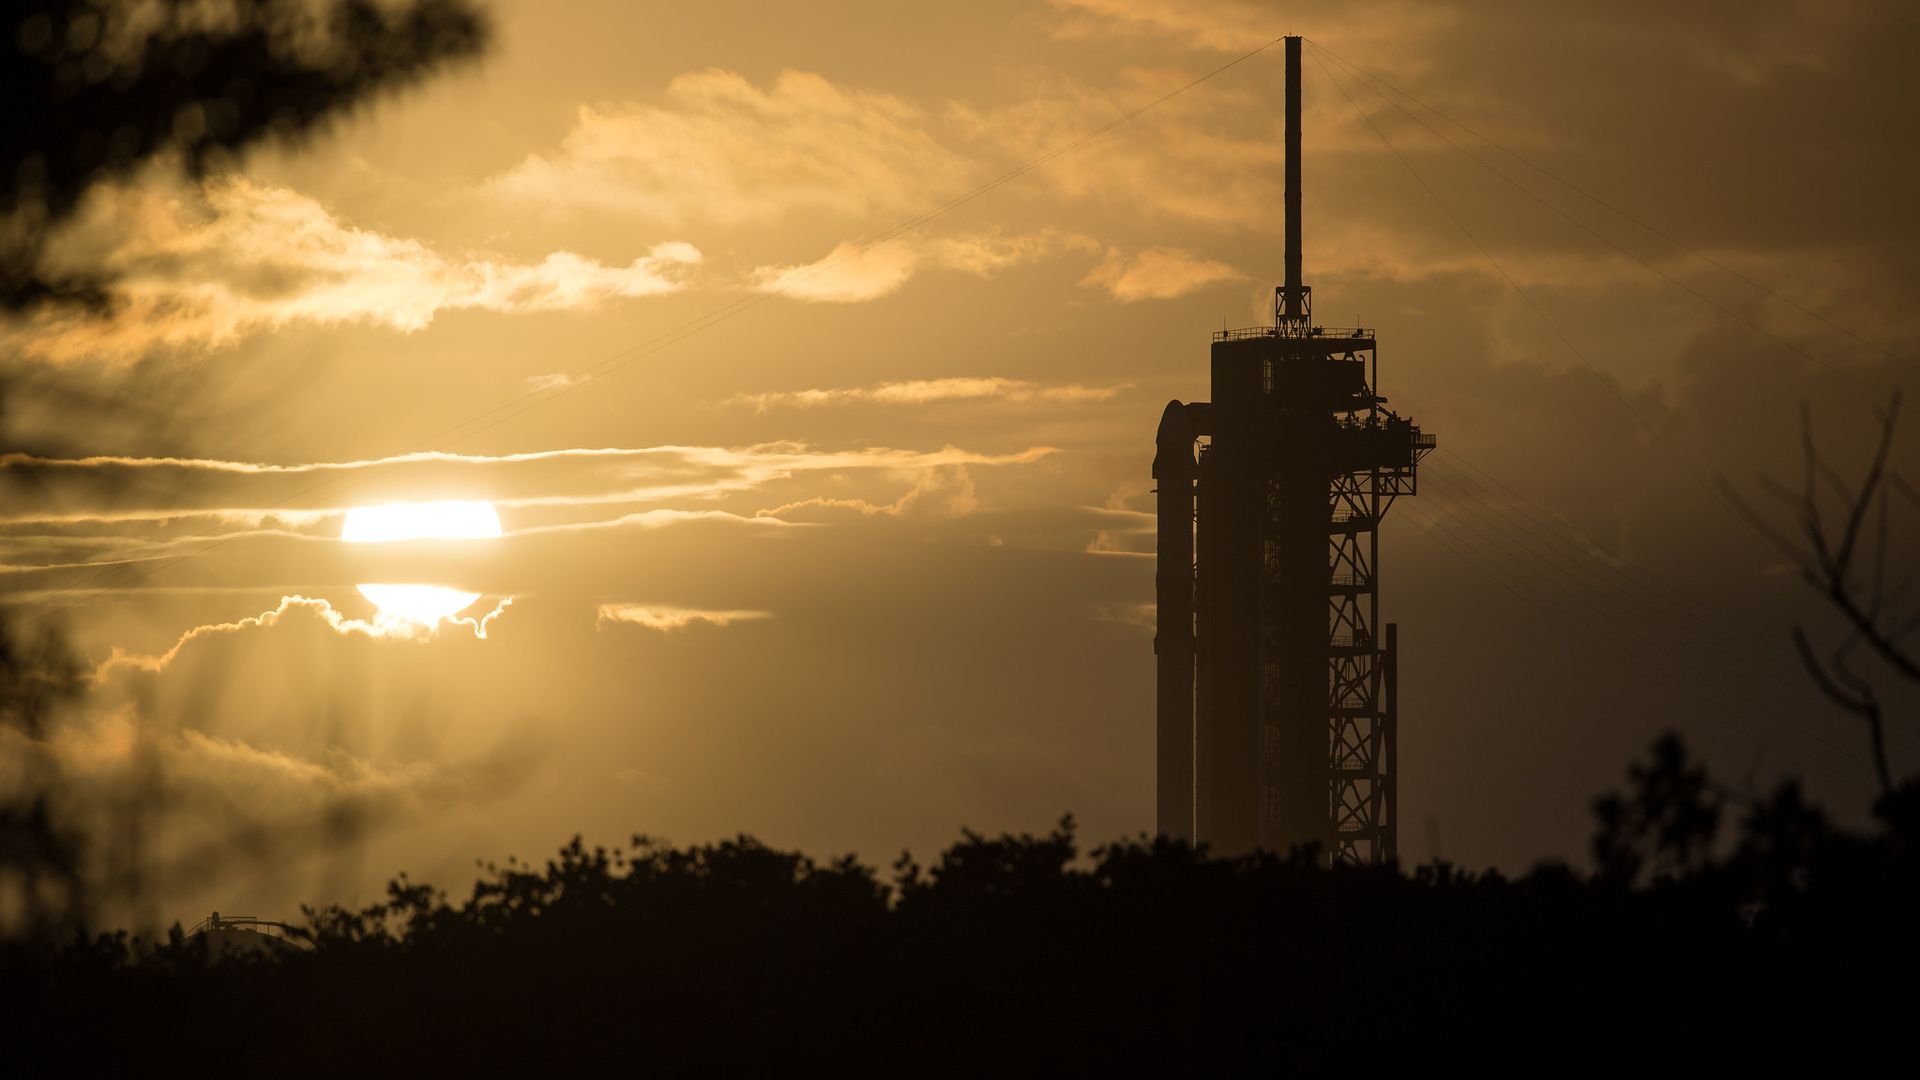 A SpaceX Falcon 9 rocket stands on a launch pad awaiting launch with the Sun rising beautifully in front of it